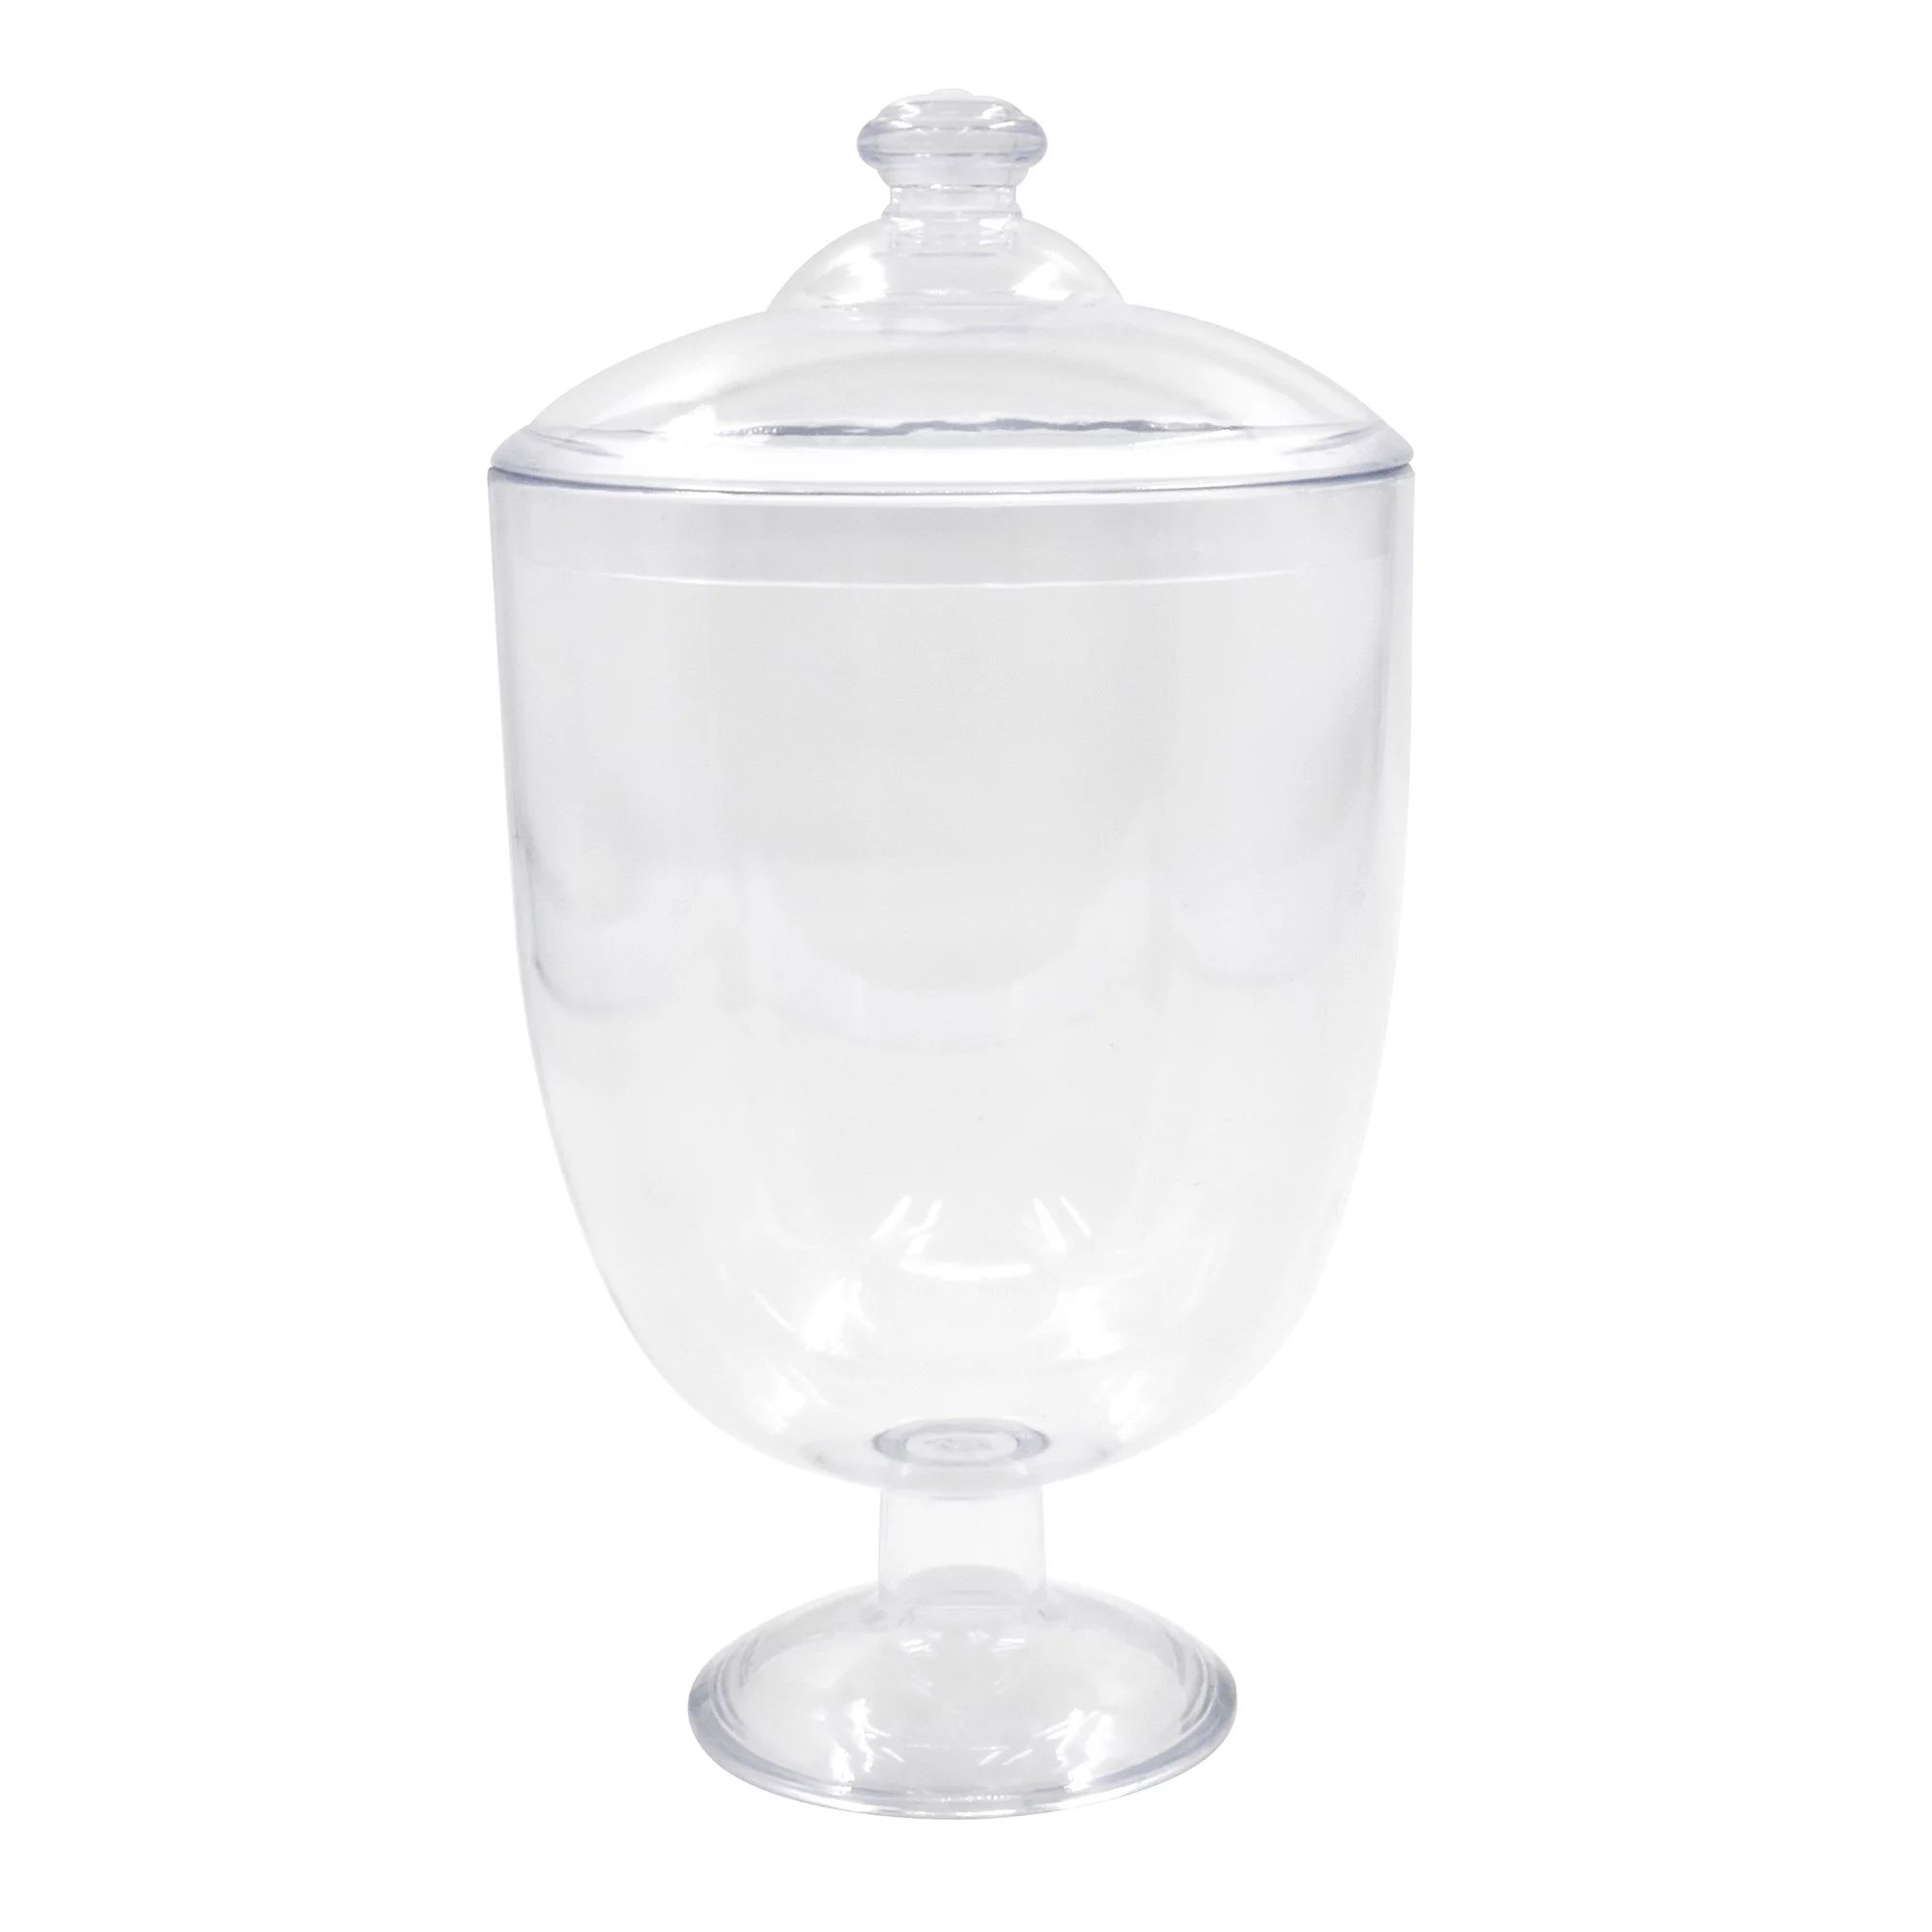 Plastic 81oz Candy Container with Lid, Clear, 1 Count, Party Favors, Way to Celebrate | Walmart (US)